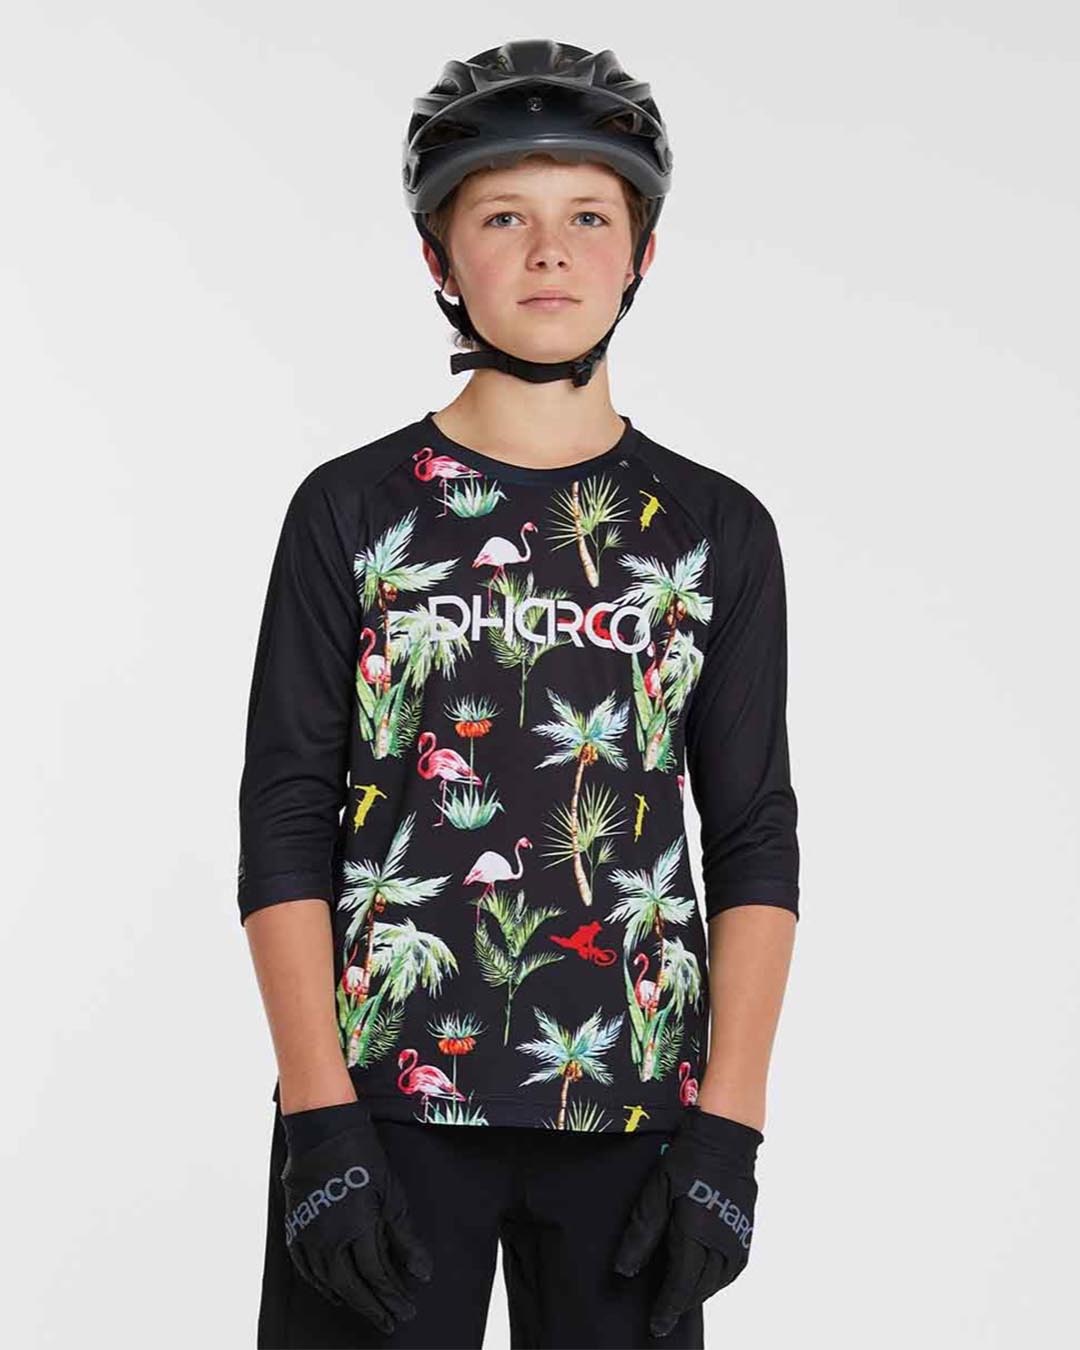 Youth Gravity Jersey | Party Shirt